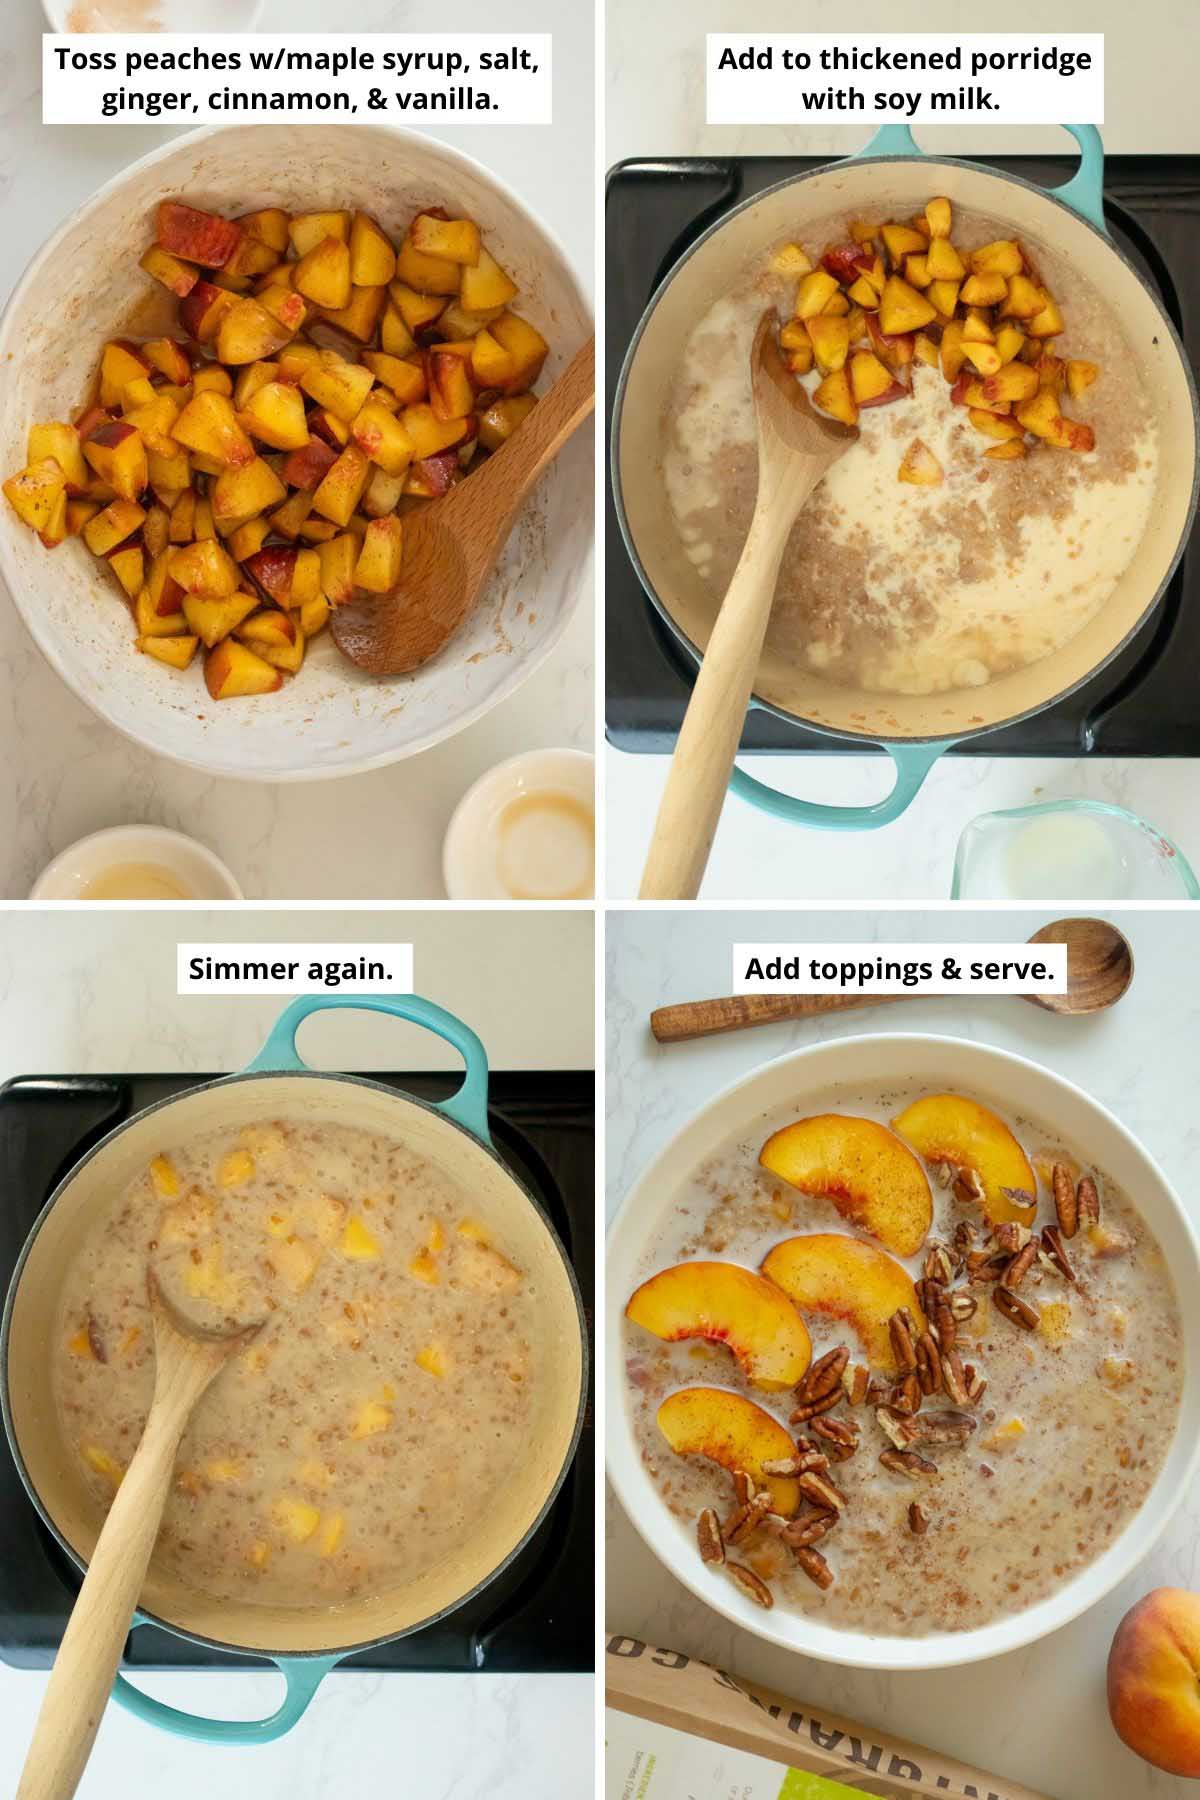 image collage showing the peaches tossed with seasonings, peach mixture and soy milk added to the spelt in the pan before and after cooking, and a bowl of spelt oatmeal topped with peaches and pecans